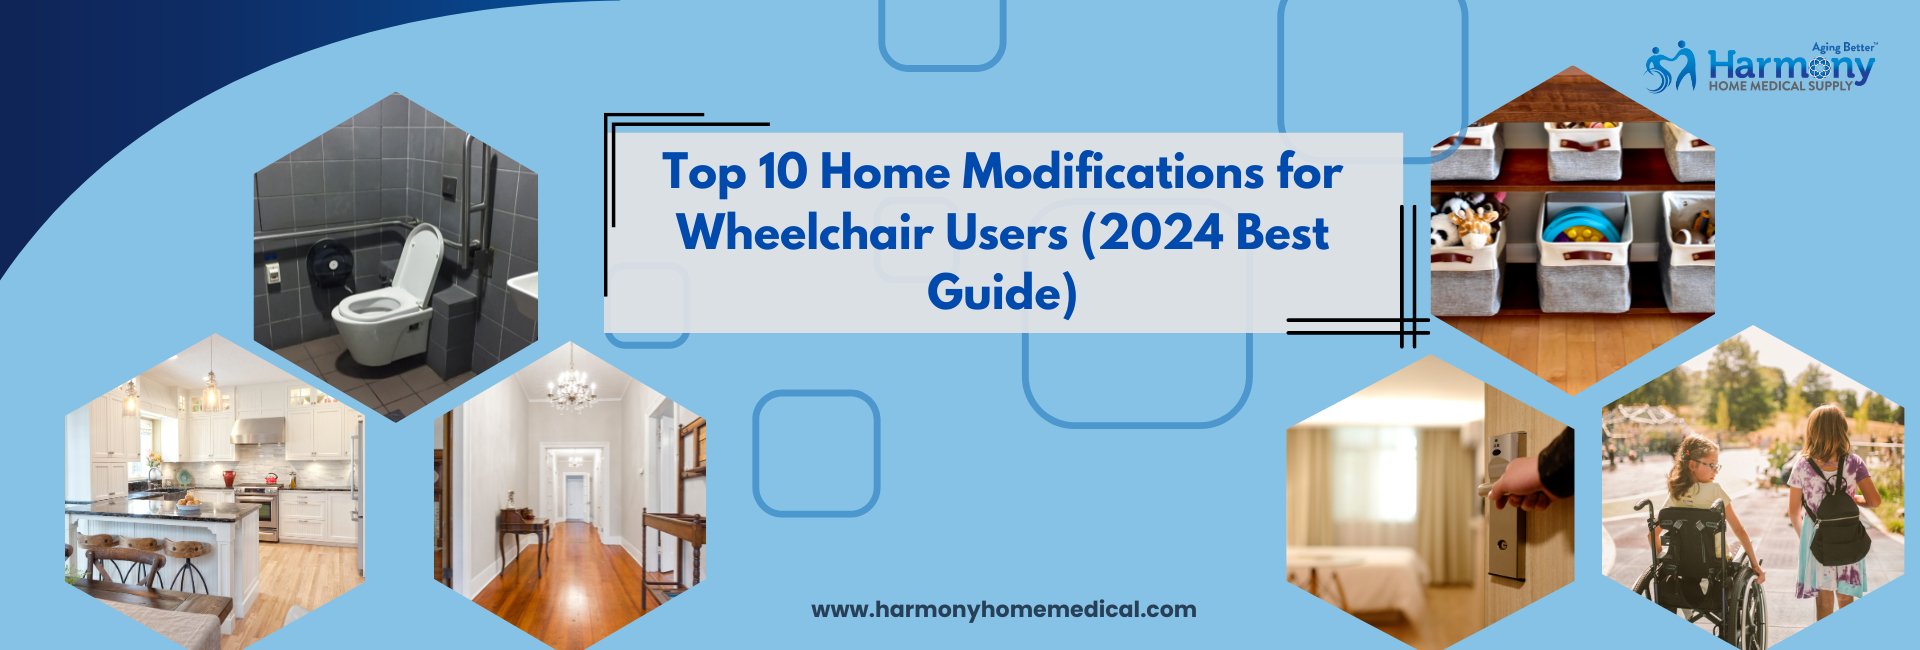 Top 10 Home Modifications for Wheelchair Users (2024 Best Guide)